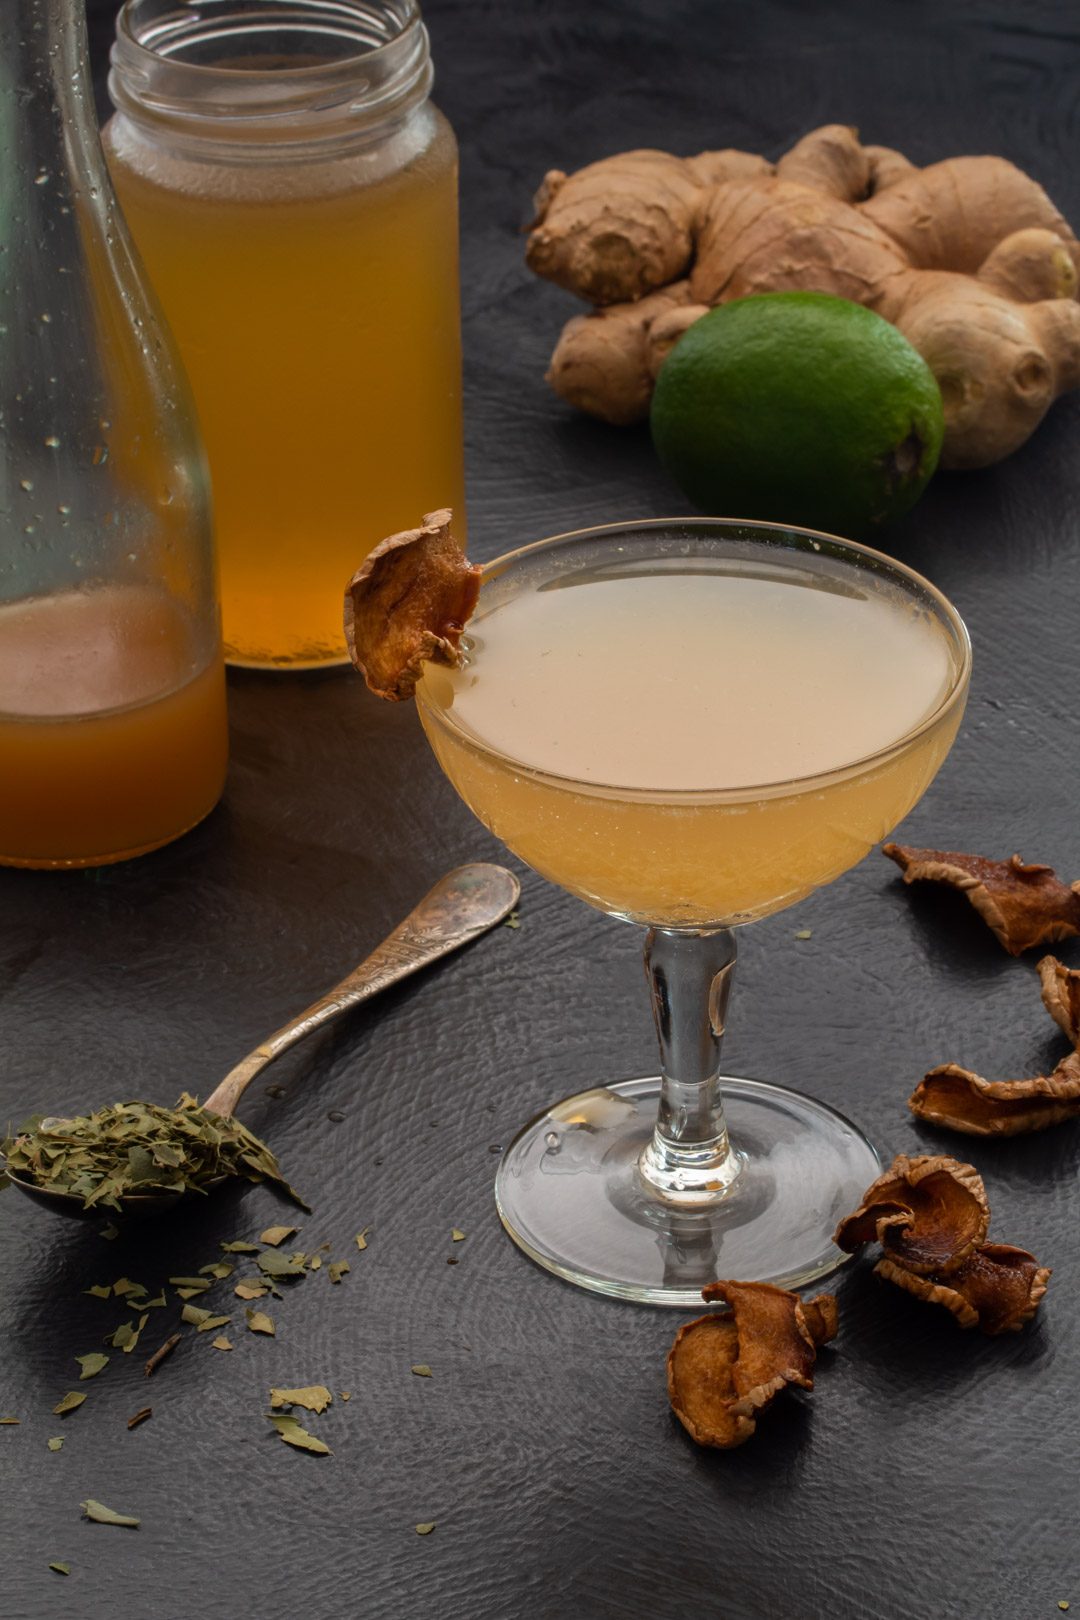 Ginger lime shrub daiquiri with cinnamon myrtle and ginger crisps: 45 degrees making, ginger lime detail